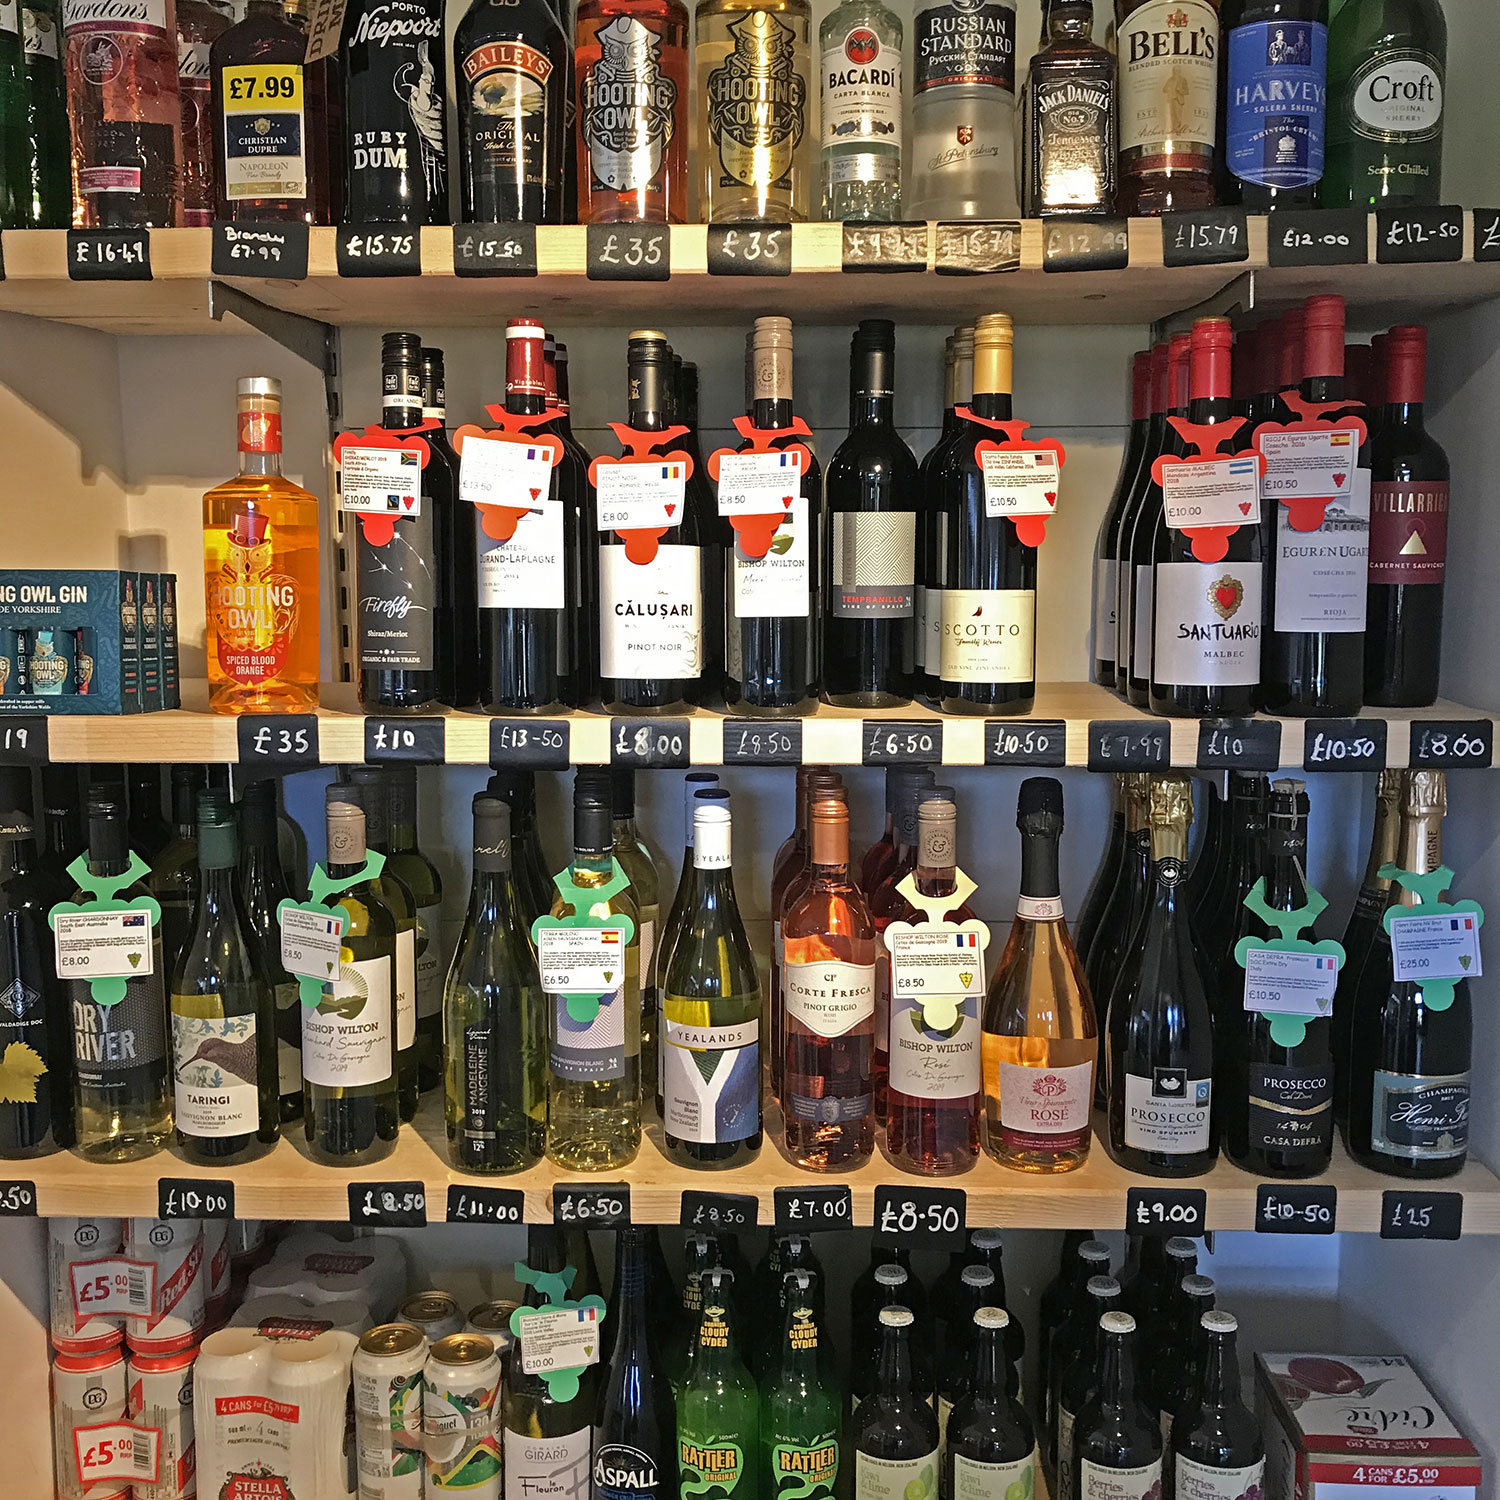 We stock a wide selection of wines, beers, ciders and spirits, including local gin and beer.